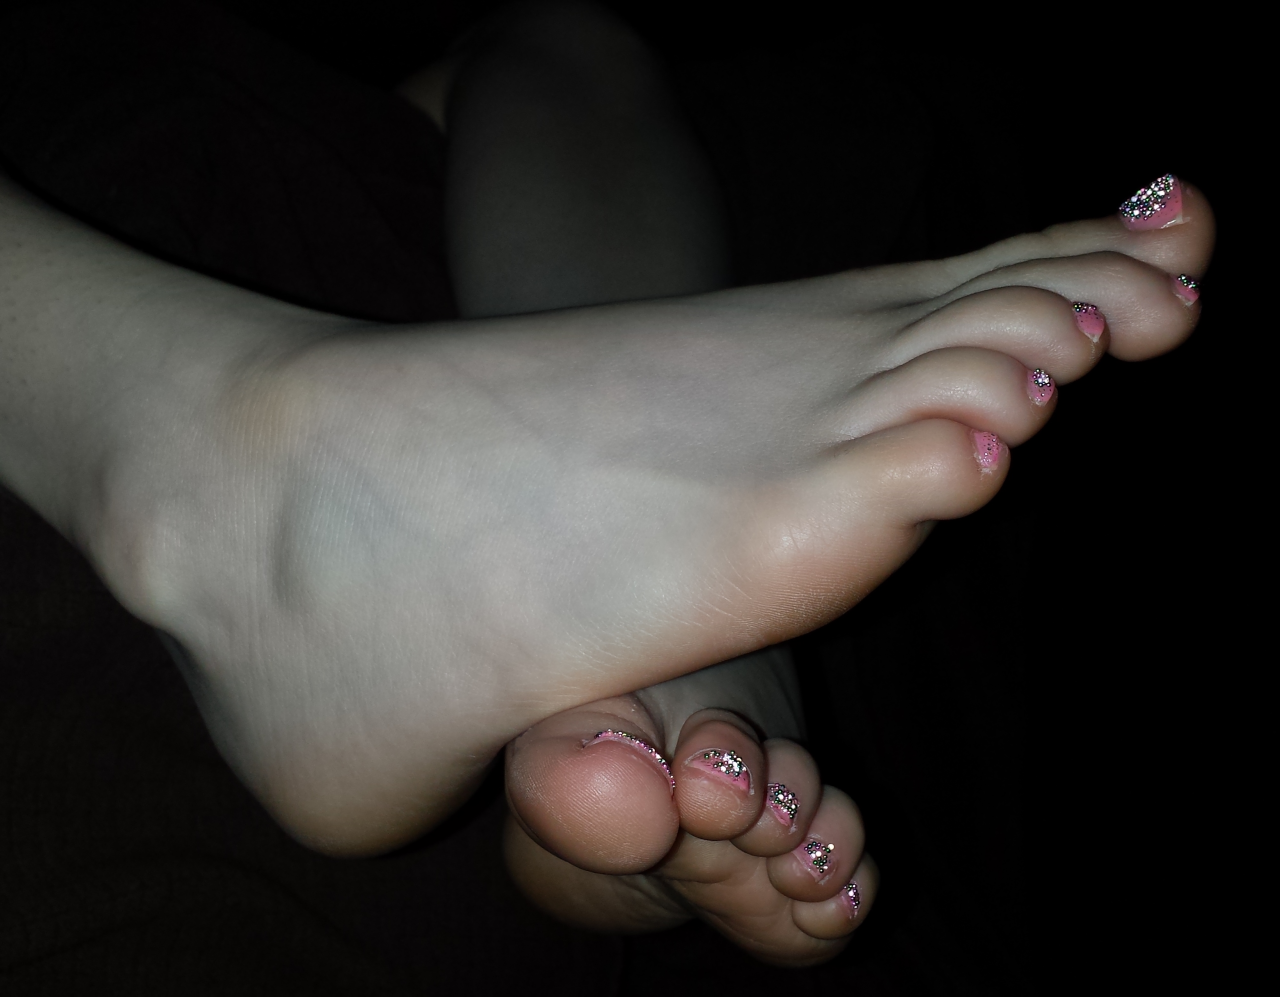 Feet, lust, sex and sexiness